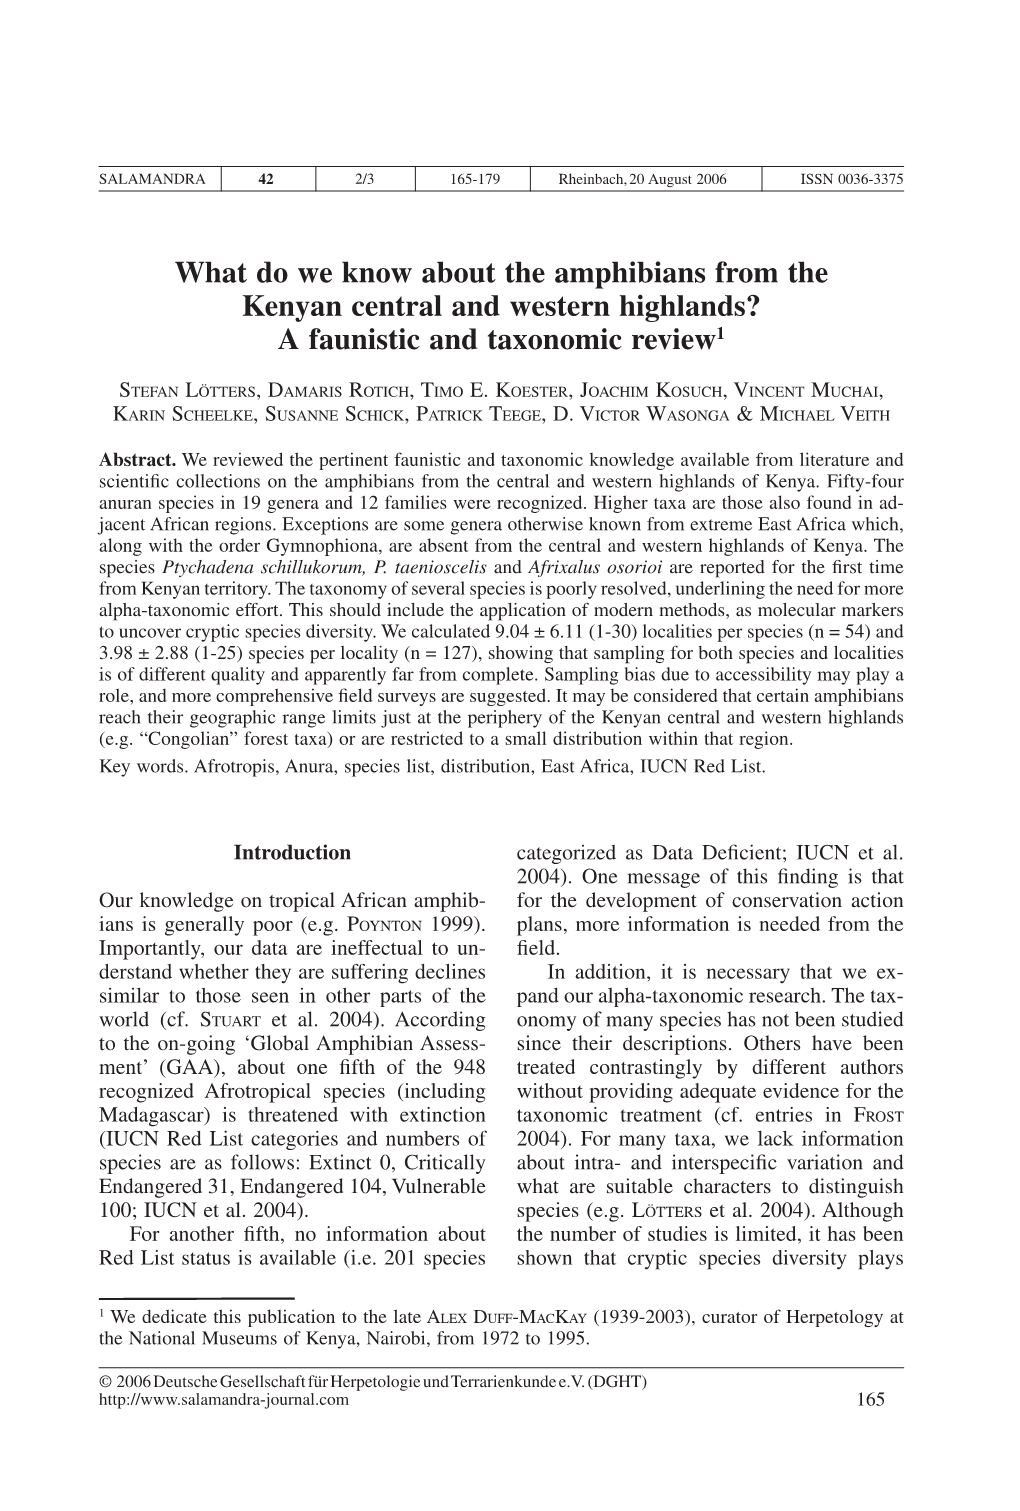 What Do We Know About the Amphibians from the Kenyan Central and Western Highlands? a Faunistic and Taxonomic Review1